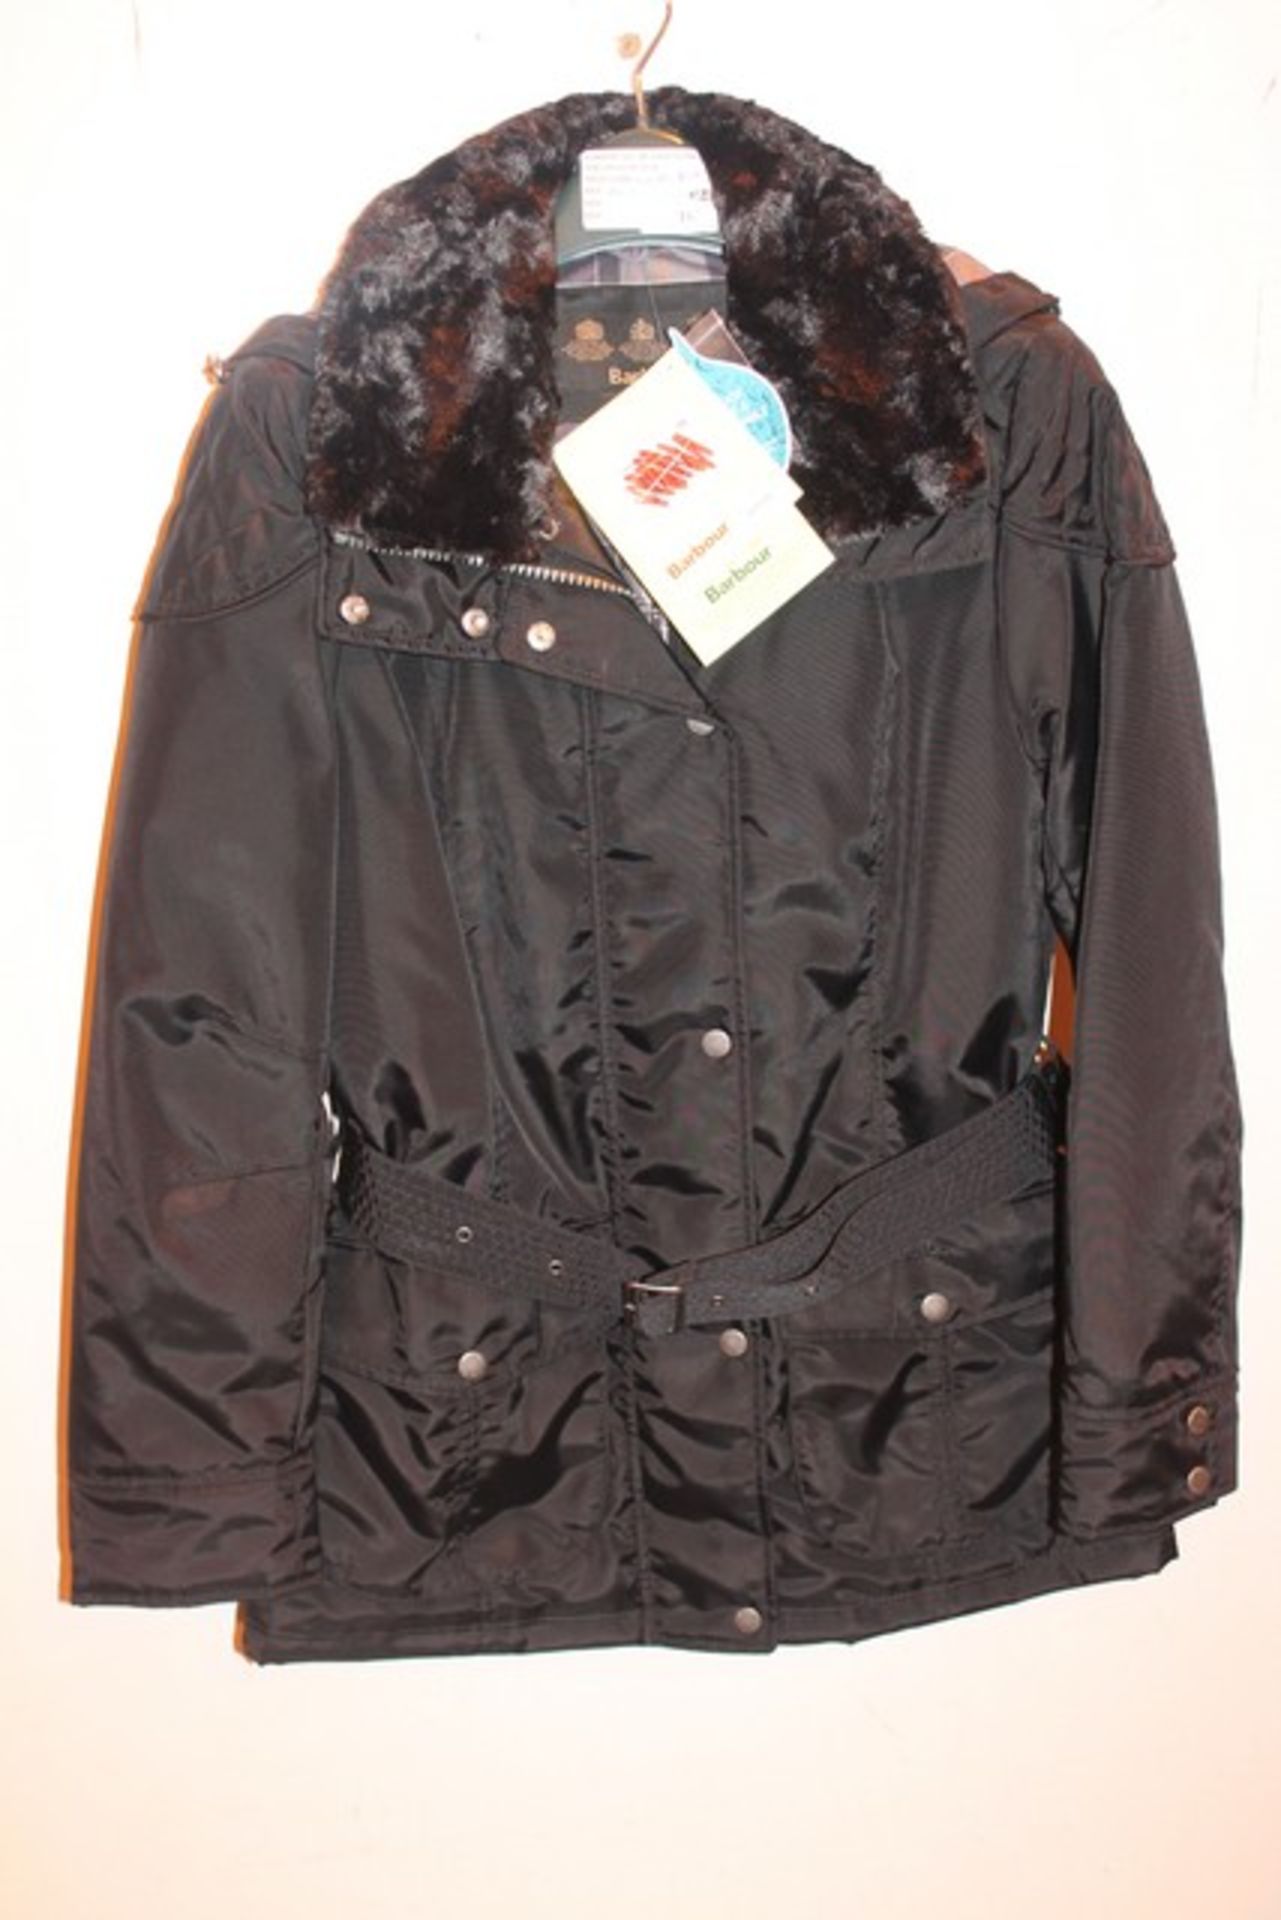 1 x BARBOUR OUTLAW LADIES WATERPROOF JACKET SIZE 10 RRP £200 (CAGE 12.008)  *PLEASE NOTE THAT THE